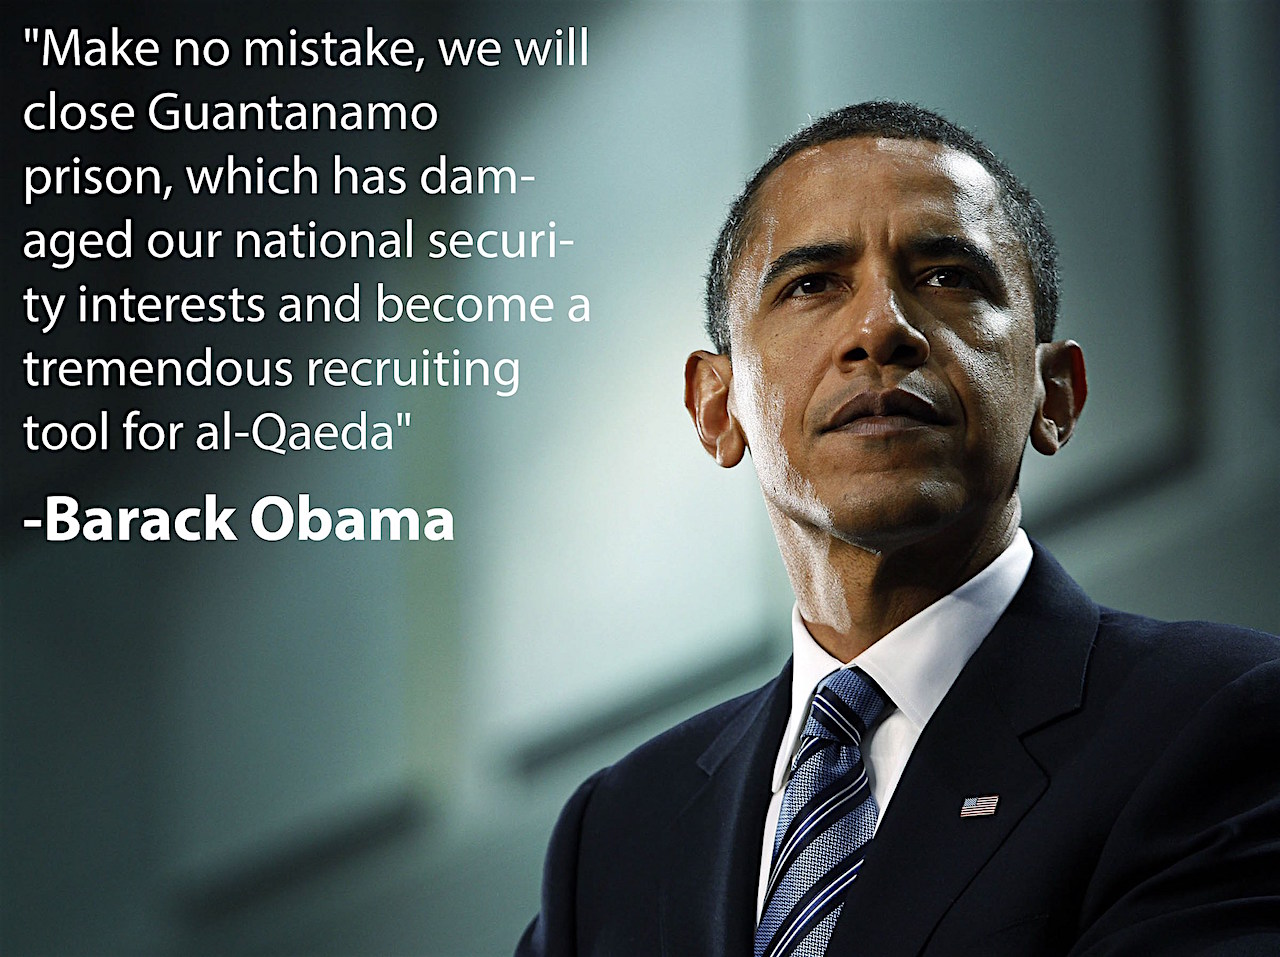 President Obama and a quote about Guantanamo from a speech he made on January 5, 2010.